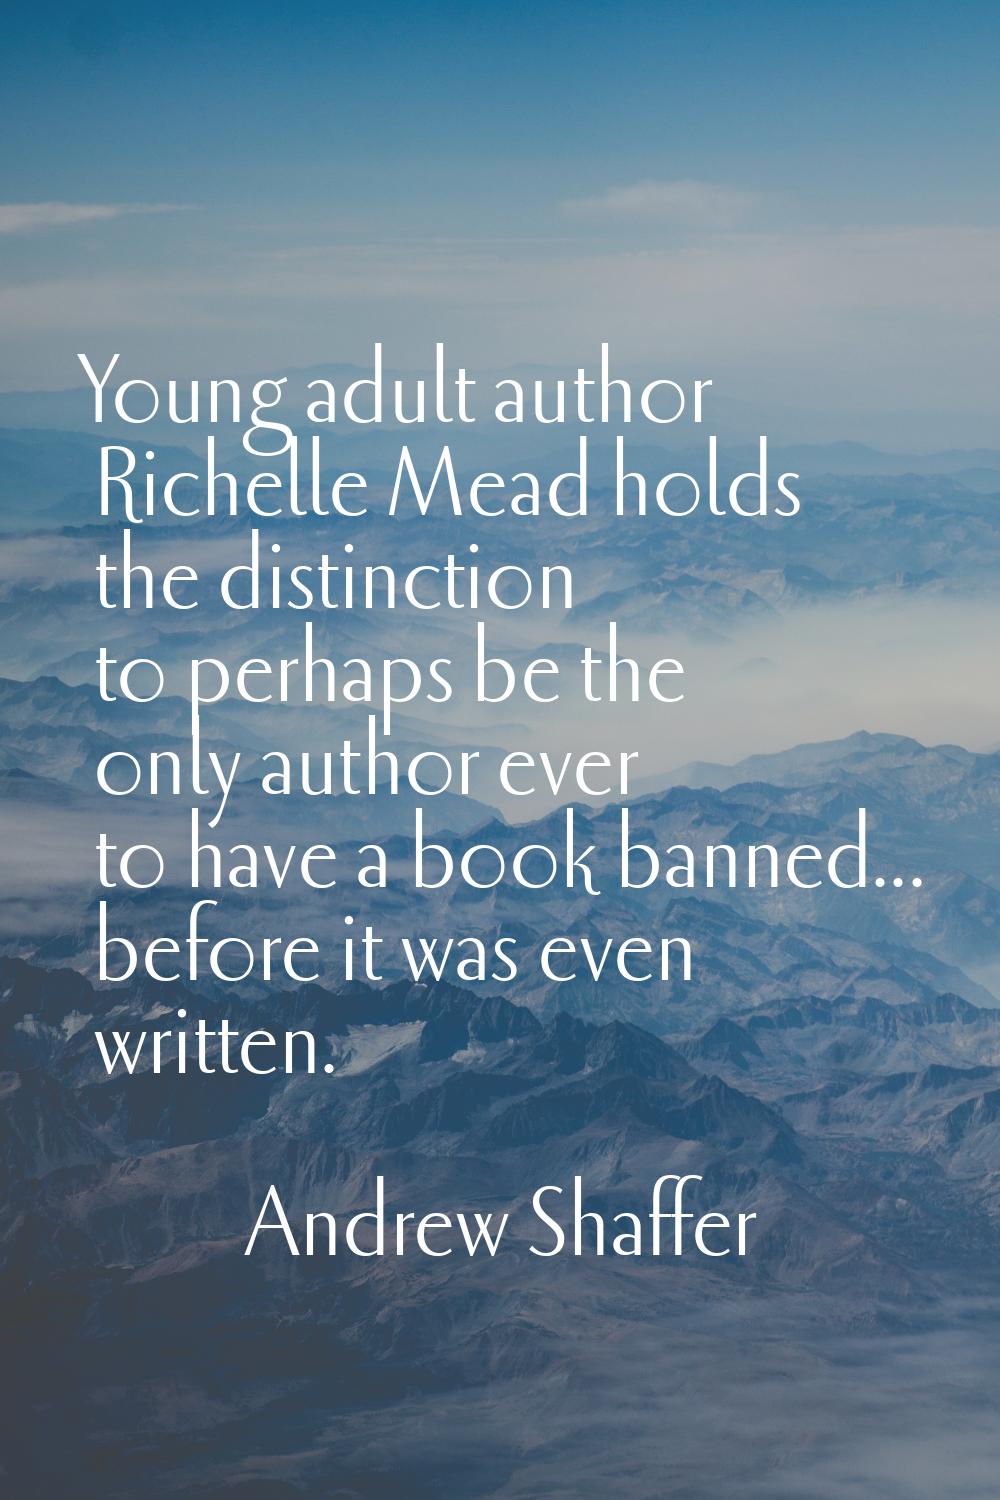 Young adult author Richelle Mead holds the distinction to perhaps be the only author ever to have a